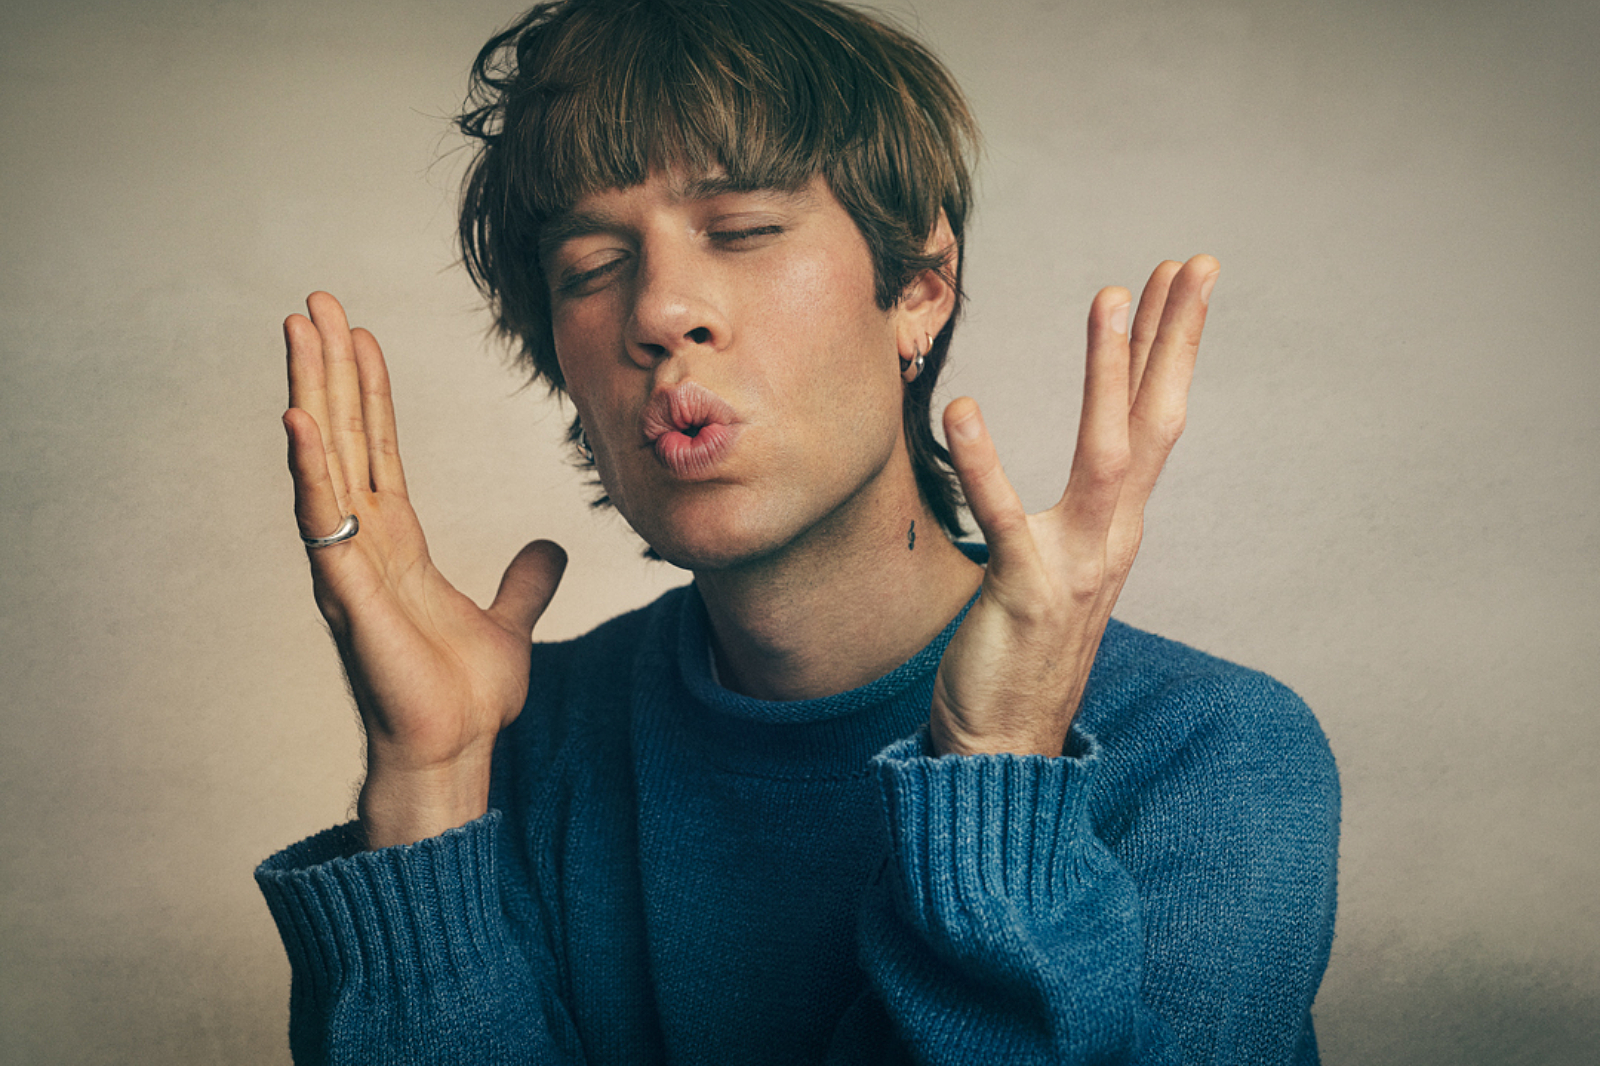 Porches announces new album 'All Day Gentle Hold !'